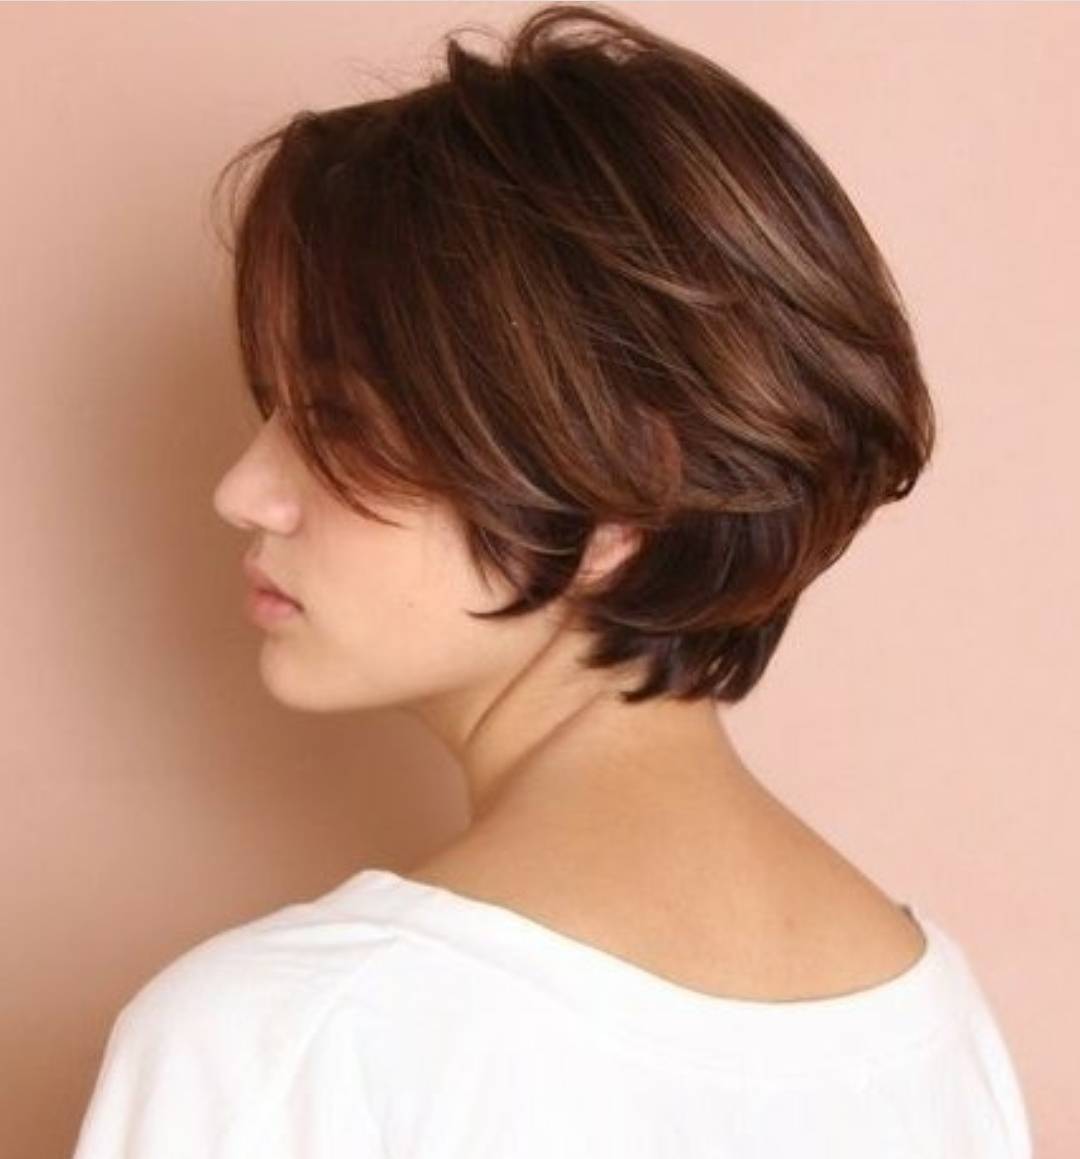 Pictures Of Cute Short Layered Bob Haircut 43